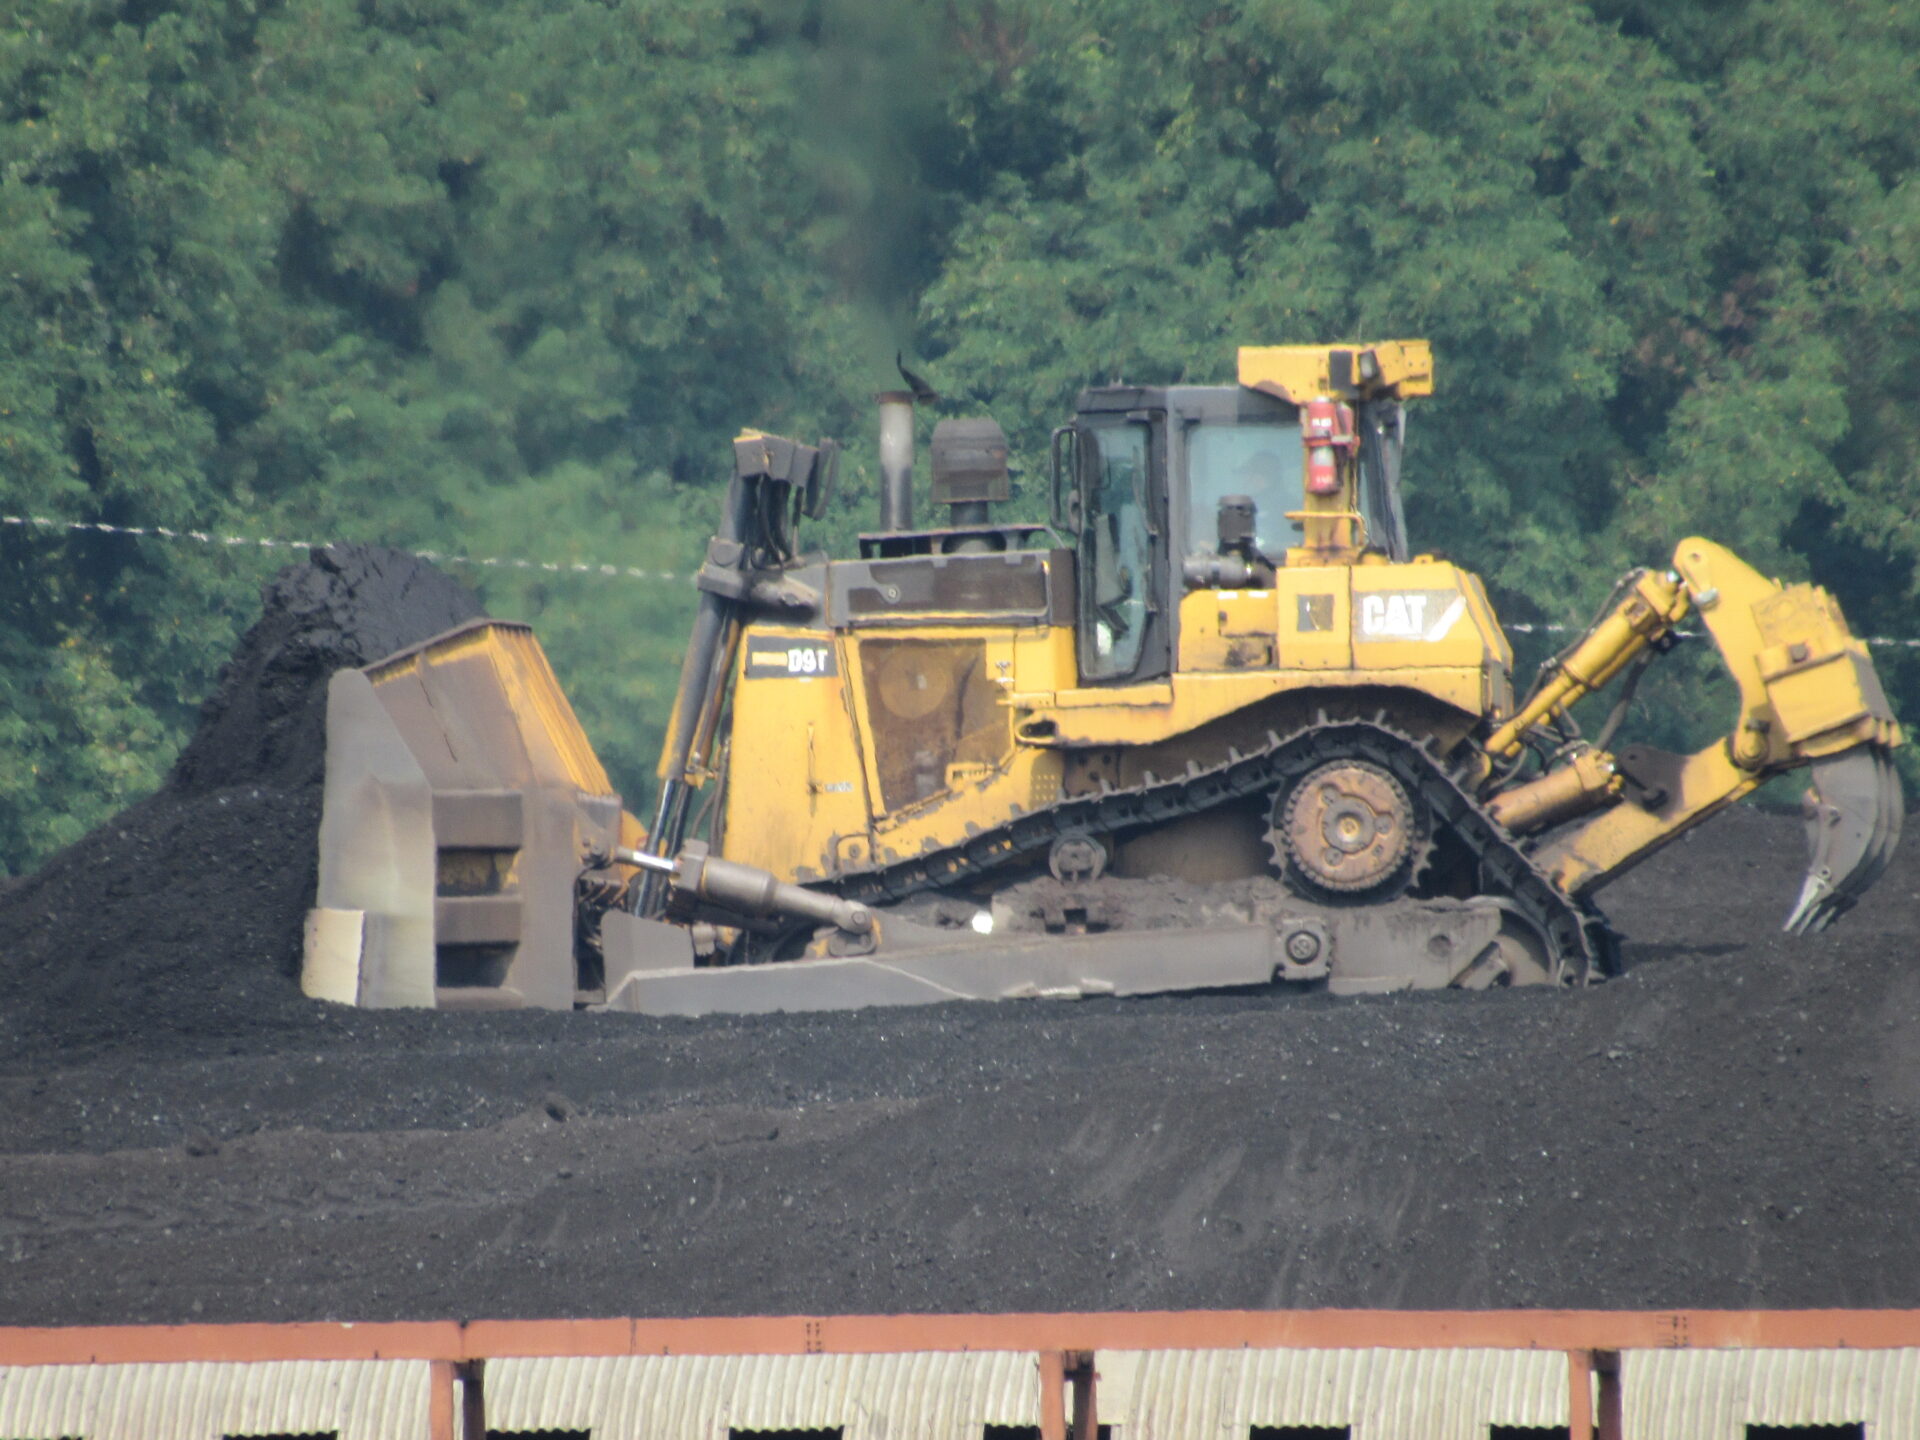 A yellow bulldozer moves a mound of black coal at a power plant in West Virginia.